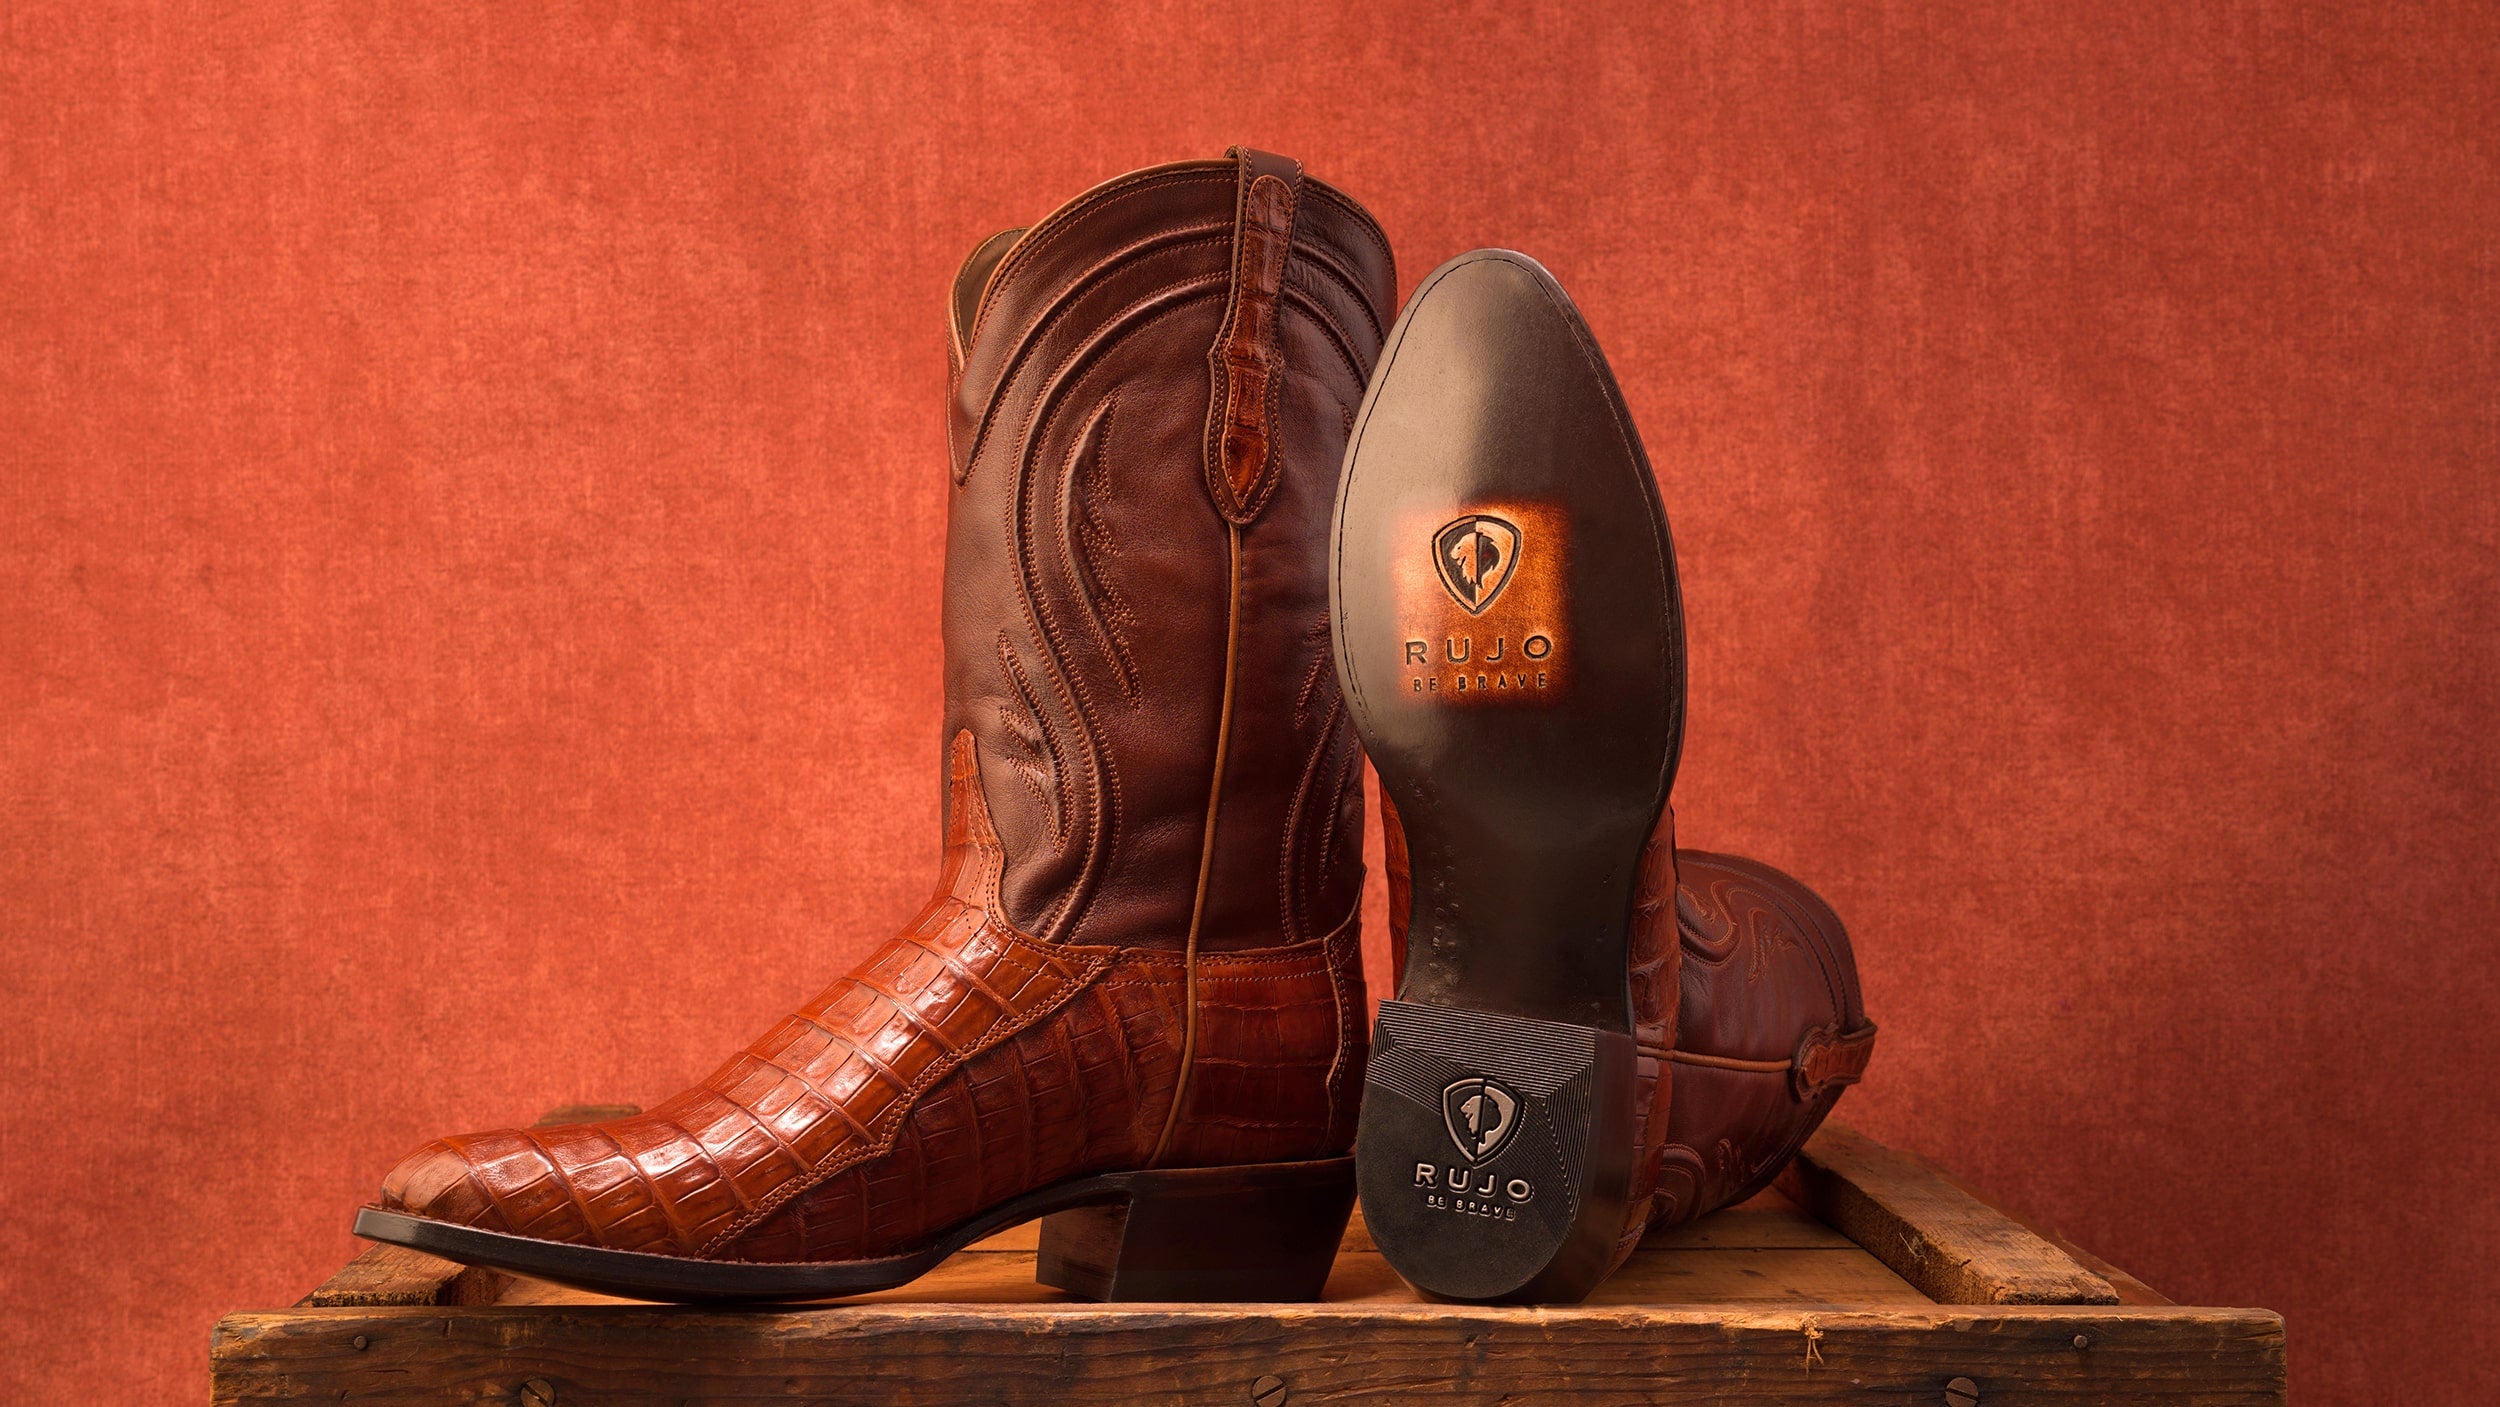 RUJO boots the Blake mens cowboy boots on display in studio on box